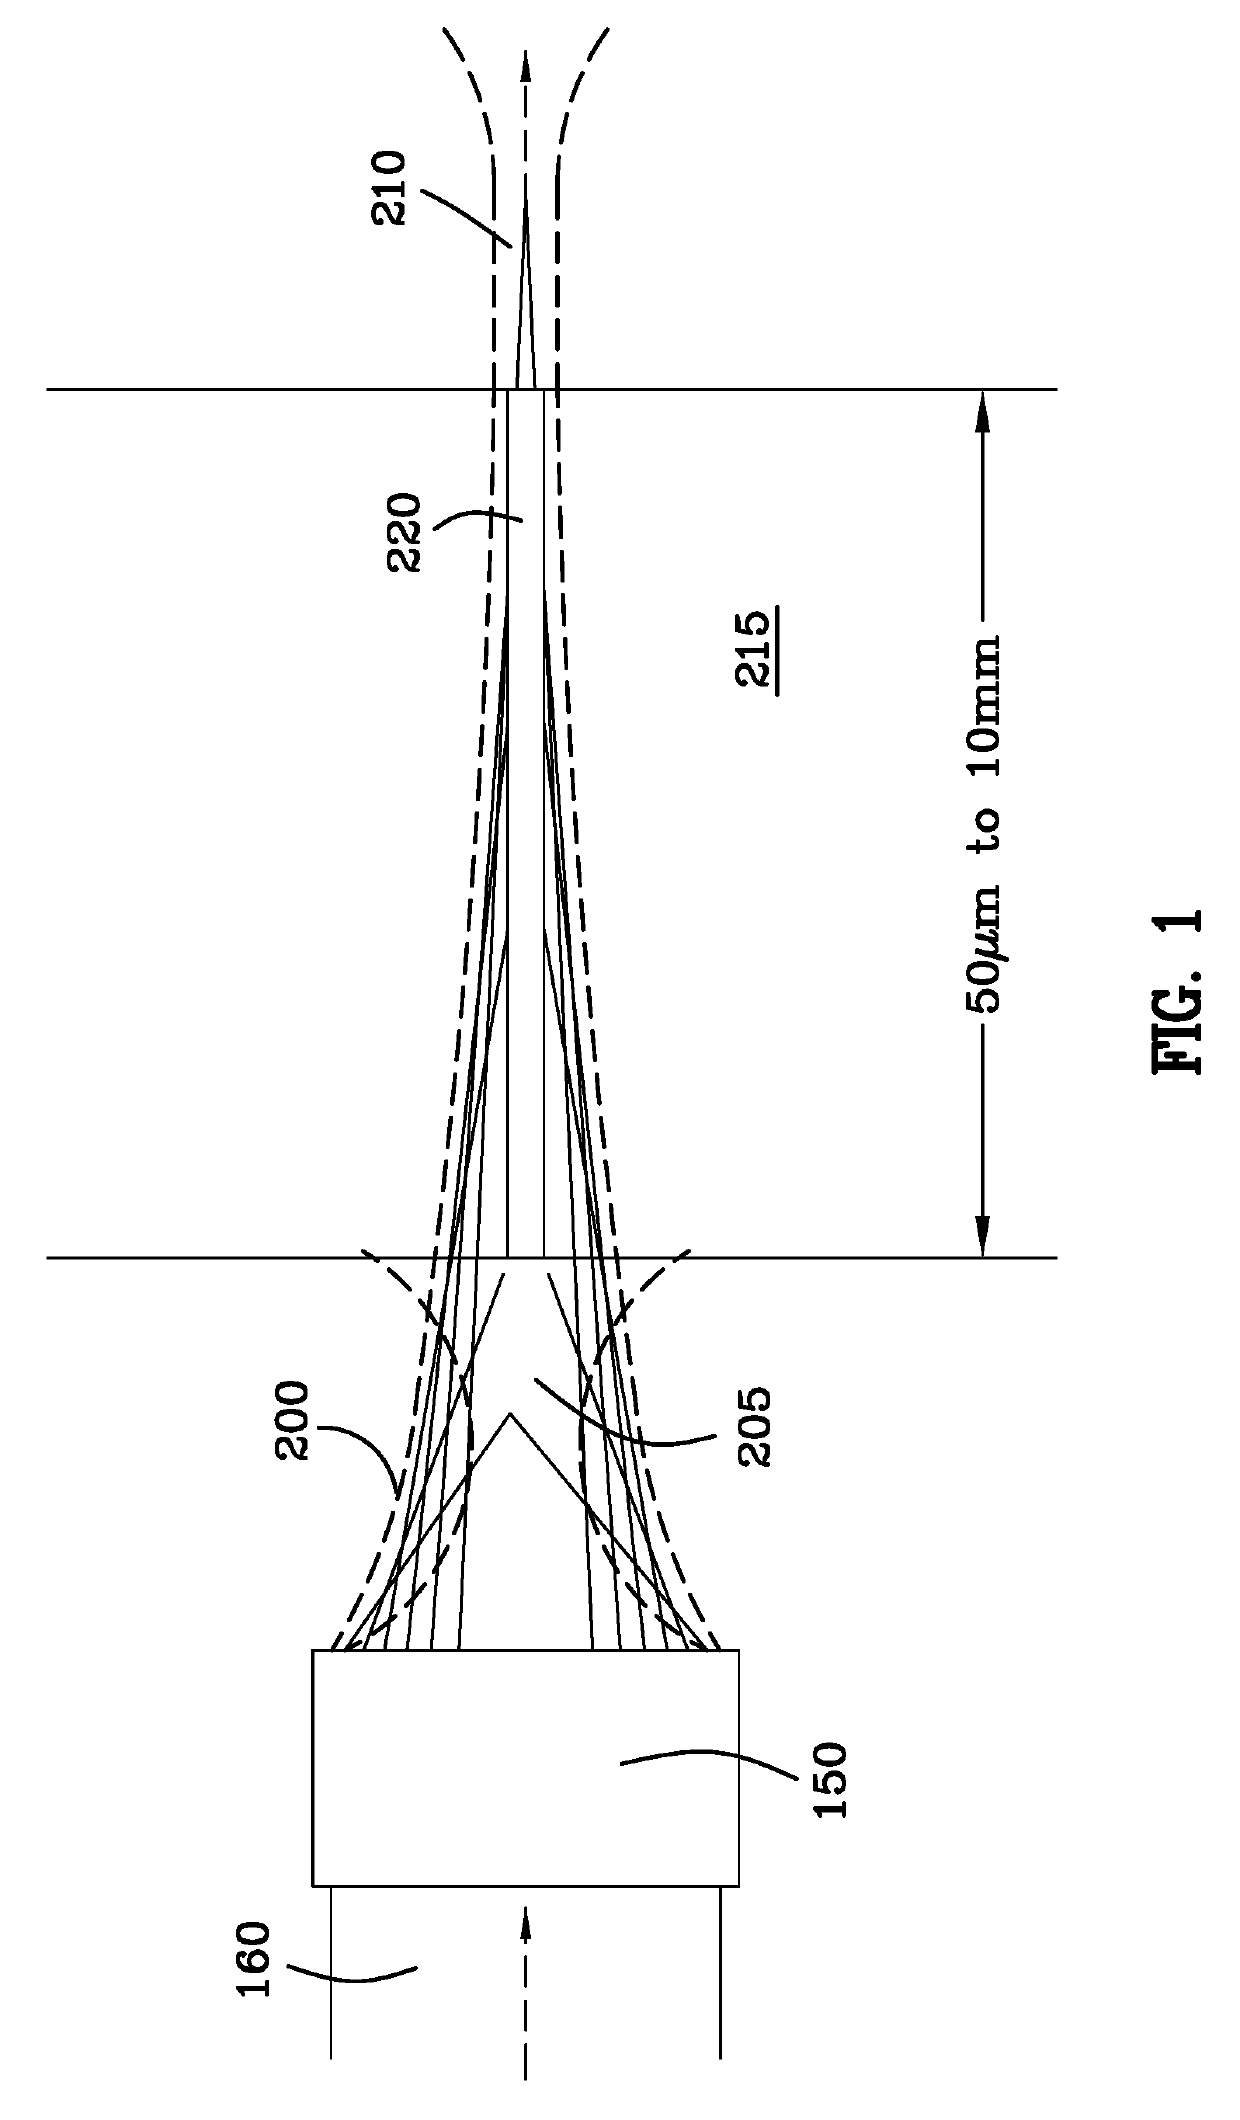 Method and system for scribing brittle material followed by chemical etching